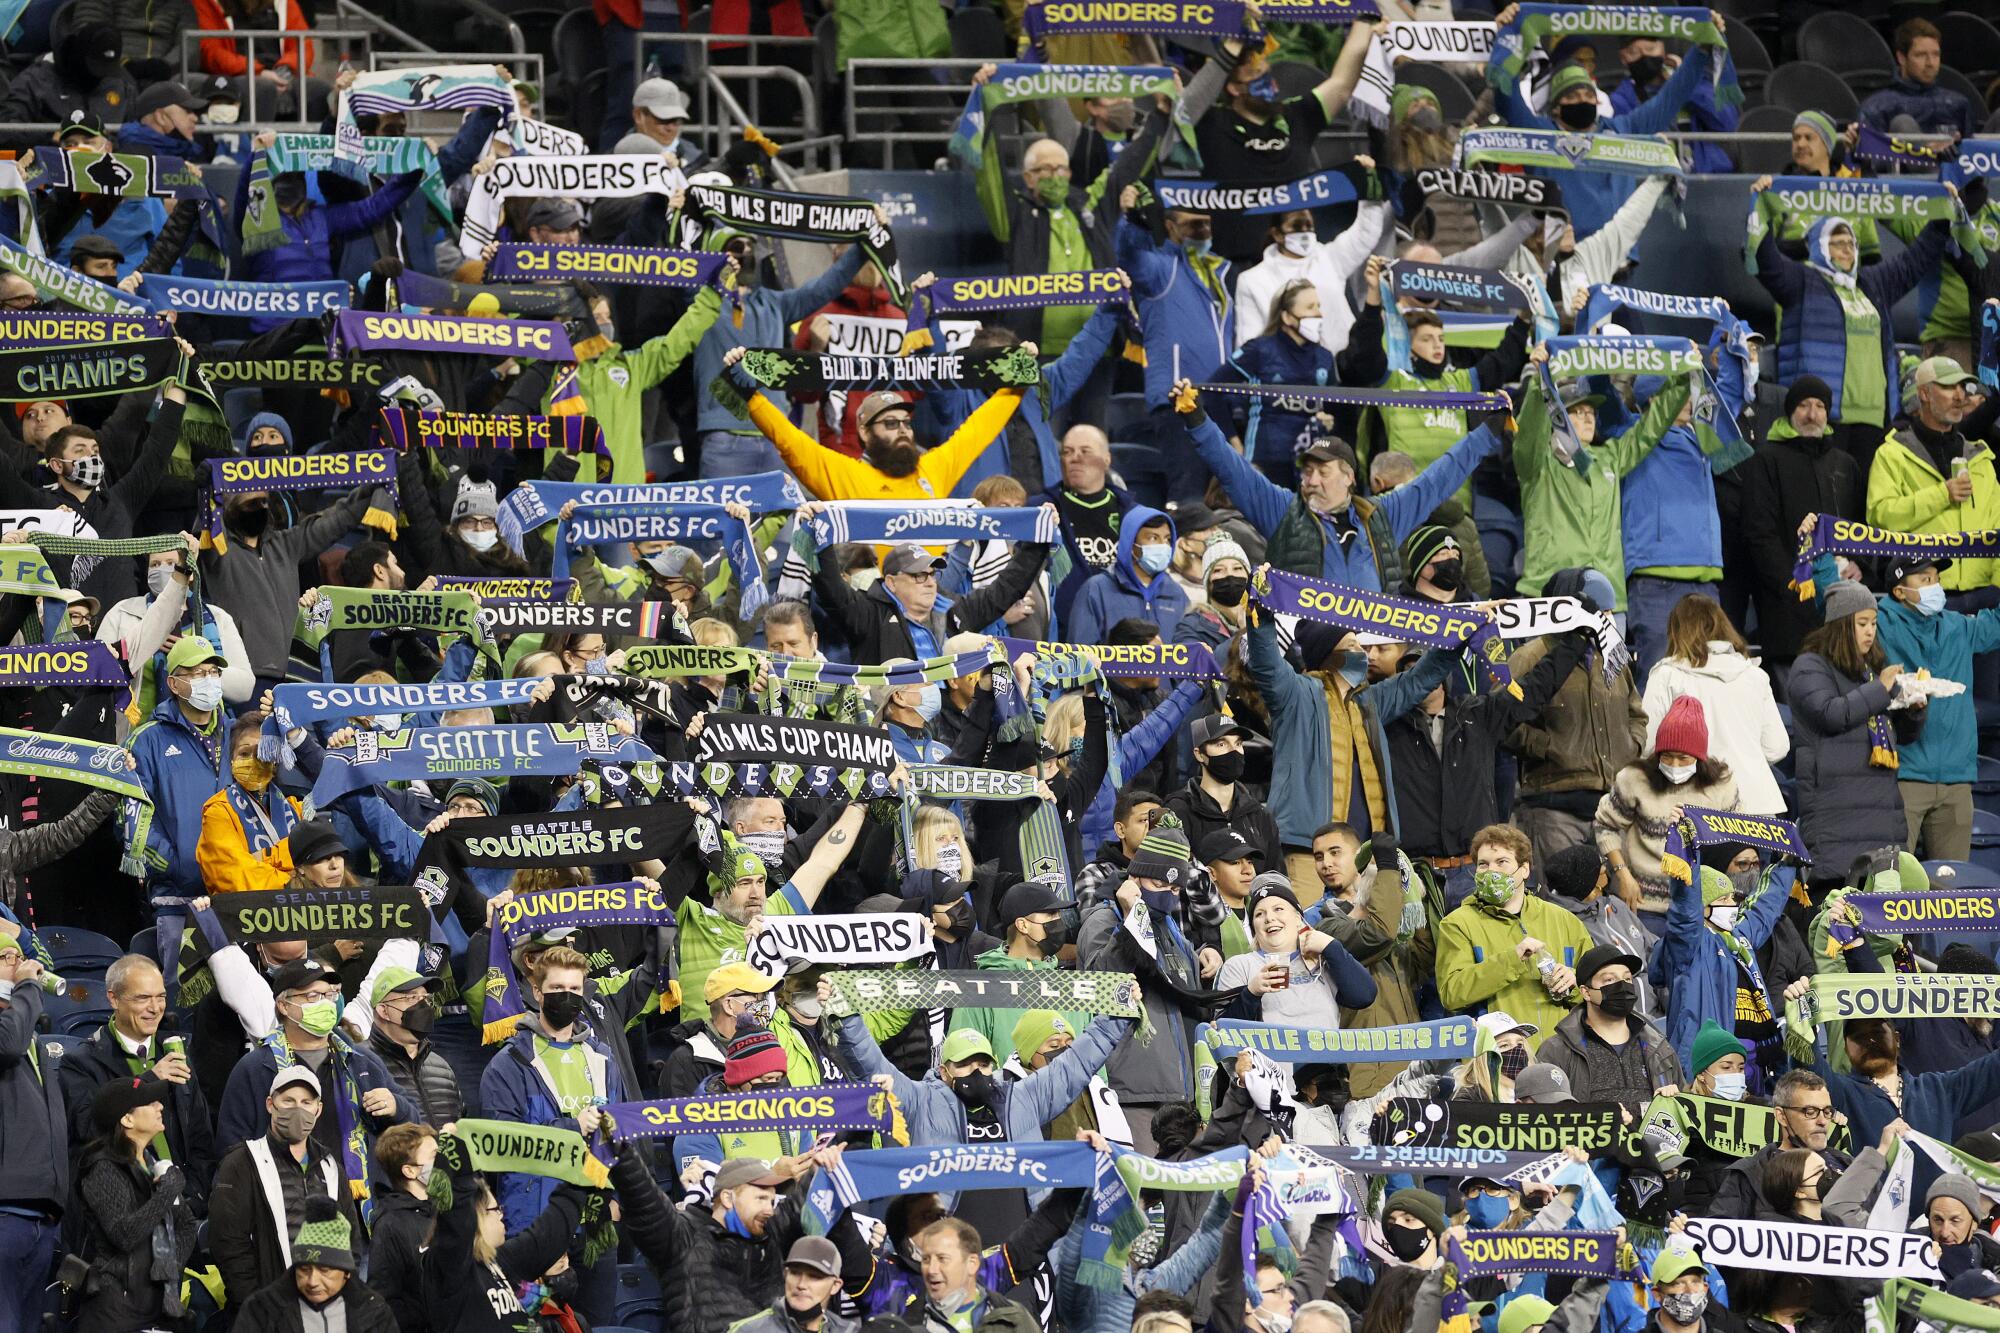 Sounders fans cheer before a game against LAFC at Lumen Field earlier this season.